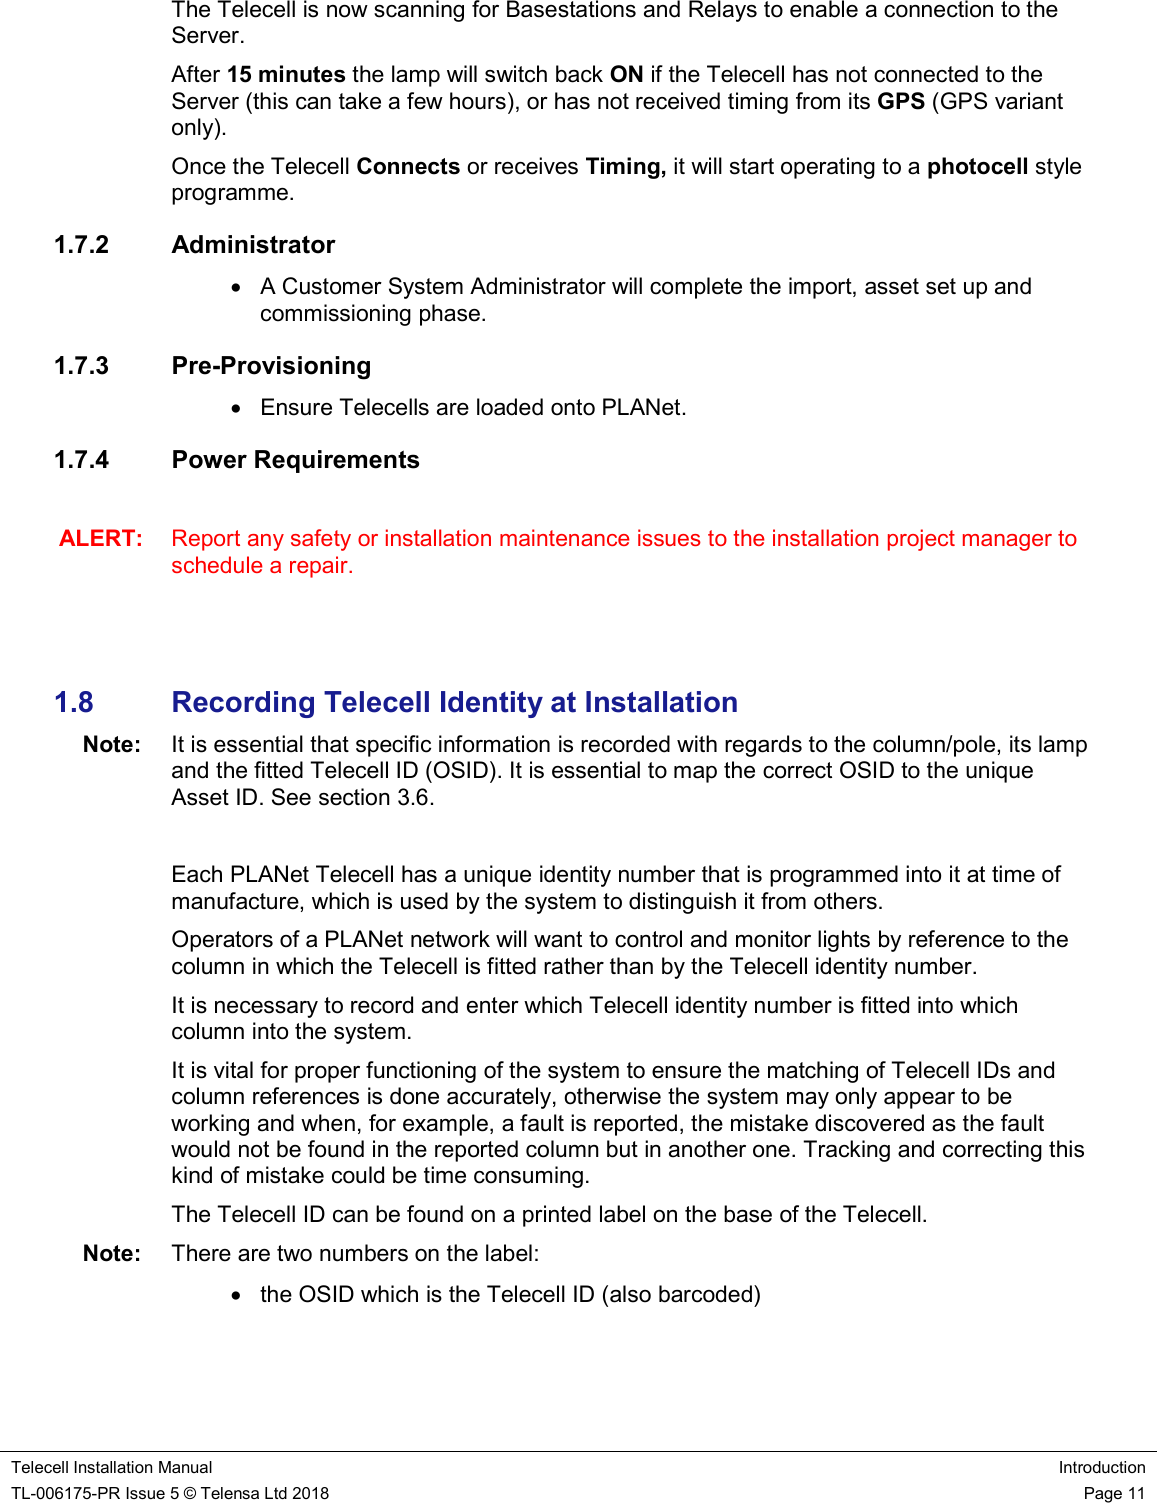    Telecell Installation Manual Introduction TL-006175-PR Issue 5 © Telensa Ltd 2018    Page 11  The Telecell is now scanning for Basestations and Relays to enable a connection to the Server.   After 15 minutes the lamp will switch back ON if the Telecell has not connected to the Server (this can take a few hours), or has not received timing from its GPS (GPS variant only).   Once the Telecell Connects or receives Timing, it will start operating to a photocell style programme. 1.7.2  Administrator   A Customer System Administrator will complete the import, asset set up and commissioning phase. 1.7.3  Pre-Provisioning   Ensure Telecells are loaded onto PLANet. 1.7.4  Power Requirements  ALERT:  Report any safety or installation maintenance issues to the installation project manager to schedule a repair.      1.8  Recording Telecell Identity at Installation Note:  It is essential that specific information is recorded with regards to the column/pole, its lamp and the fitted Telecell ID (OSID). It is essential to map the correct OSID to the unique Asset ID. See section 3.6.  Each PLANet Telecell has a unique identity number that is programmed into it at time of manufacture, which is used by the system to distinguish it from others.  Operators of a PLANet network will want to control and monitor lights by reference to the column in which the Telecell is fitted rather than by the Telecell identity number.  It is necessary to record and enter which Telecell identity number is fitted into which column into the system. It is vital for proper functioning of the system to ensure the matching of Telecell IDs and column references is done accurately, otherwise the system may only appear to be working and when, for example, a fault is reported, the mistake discovered as the fault would not be found in the reported column but in another one. Tracking and correcting this kind of mistake could be time consuming. The Telecell ID can be found on a printed label on the base of the Telecell.  Note:  There are two numbers on the label:    the OSID which is the Telecell ID (also barcoded)  